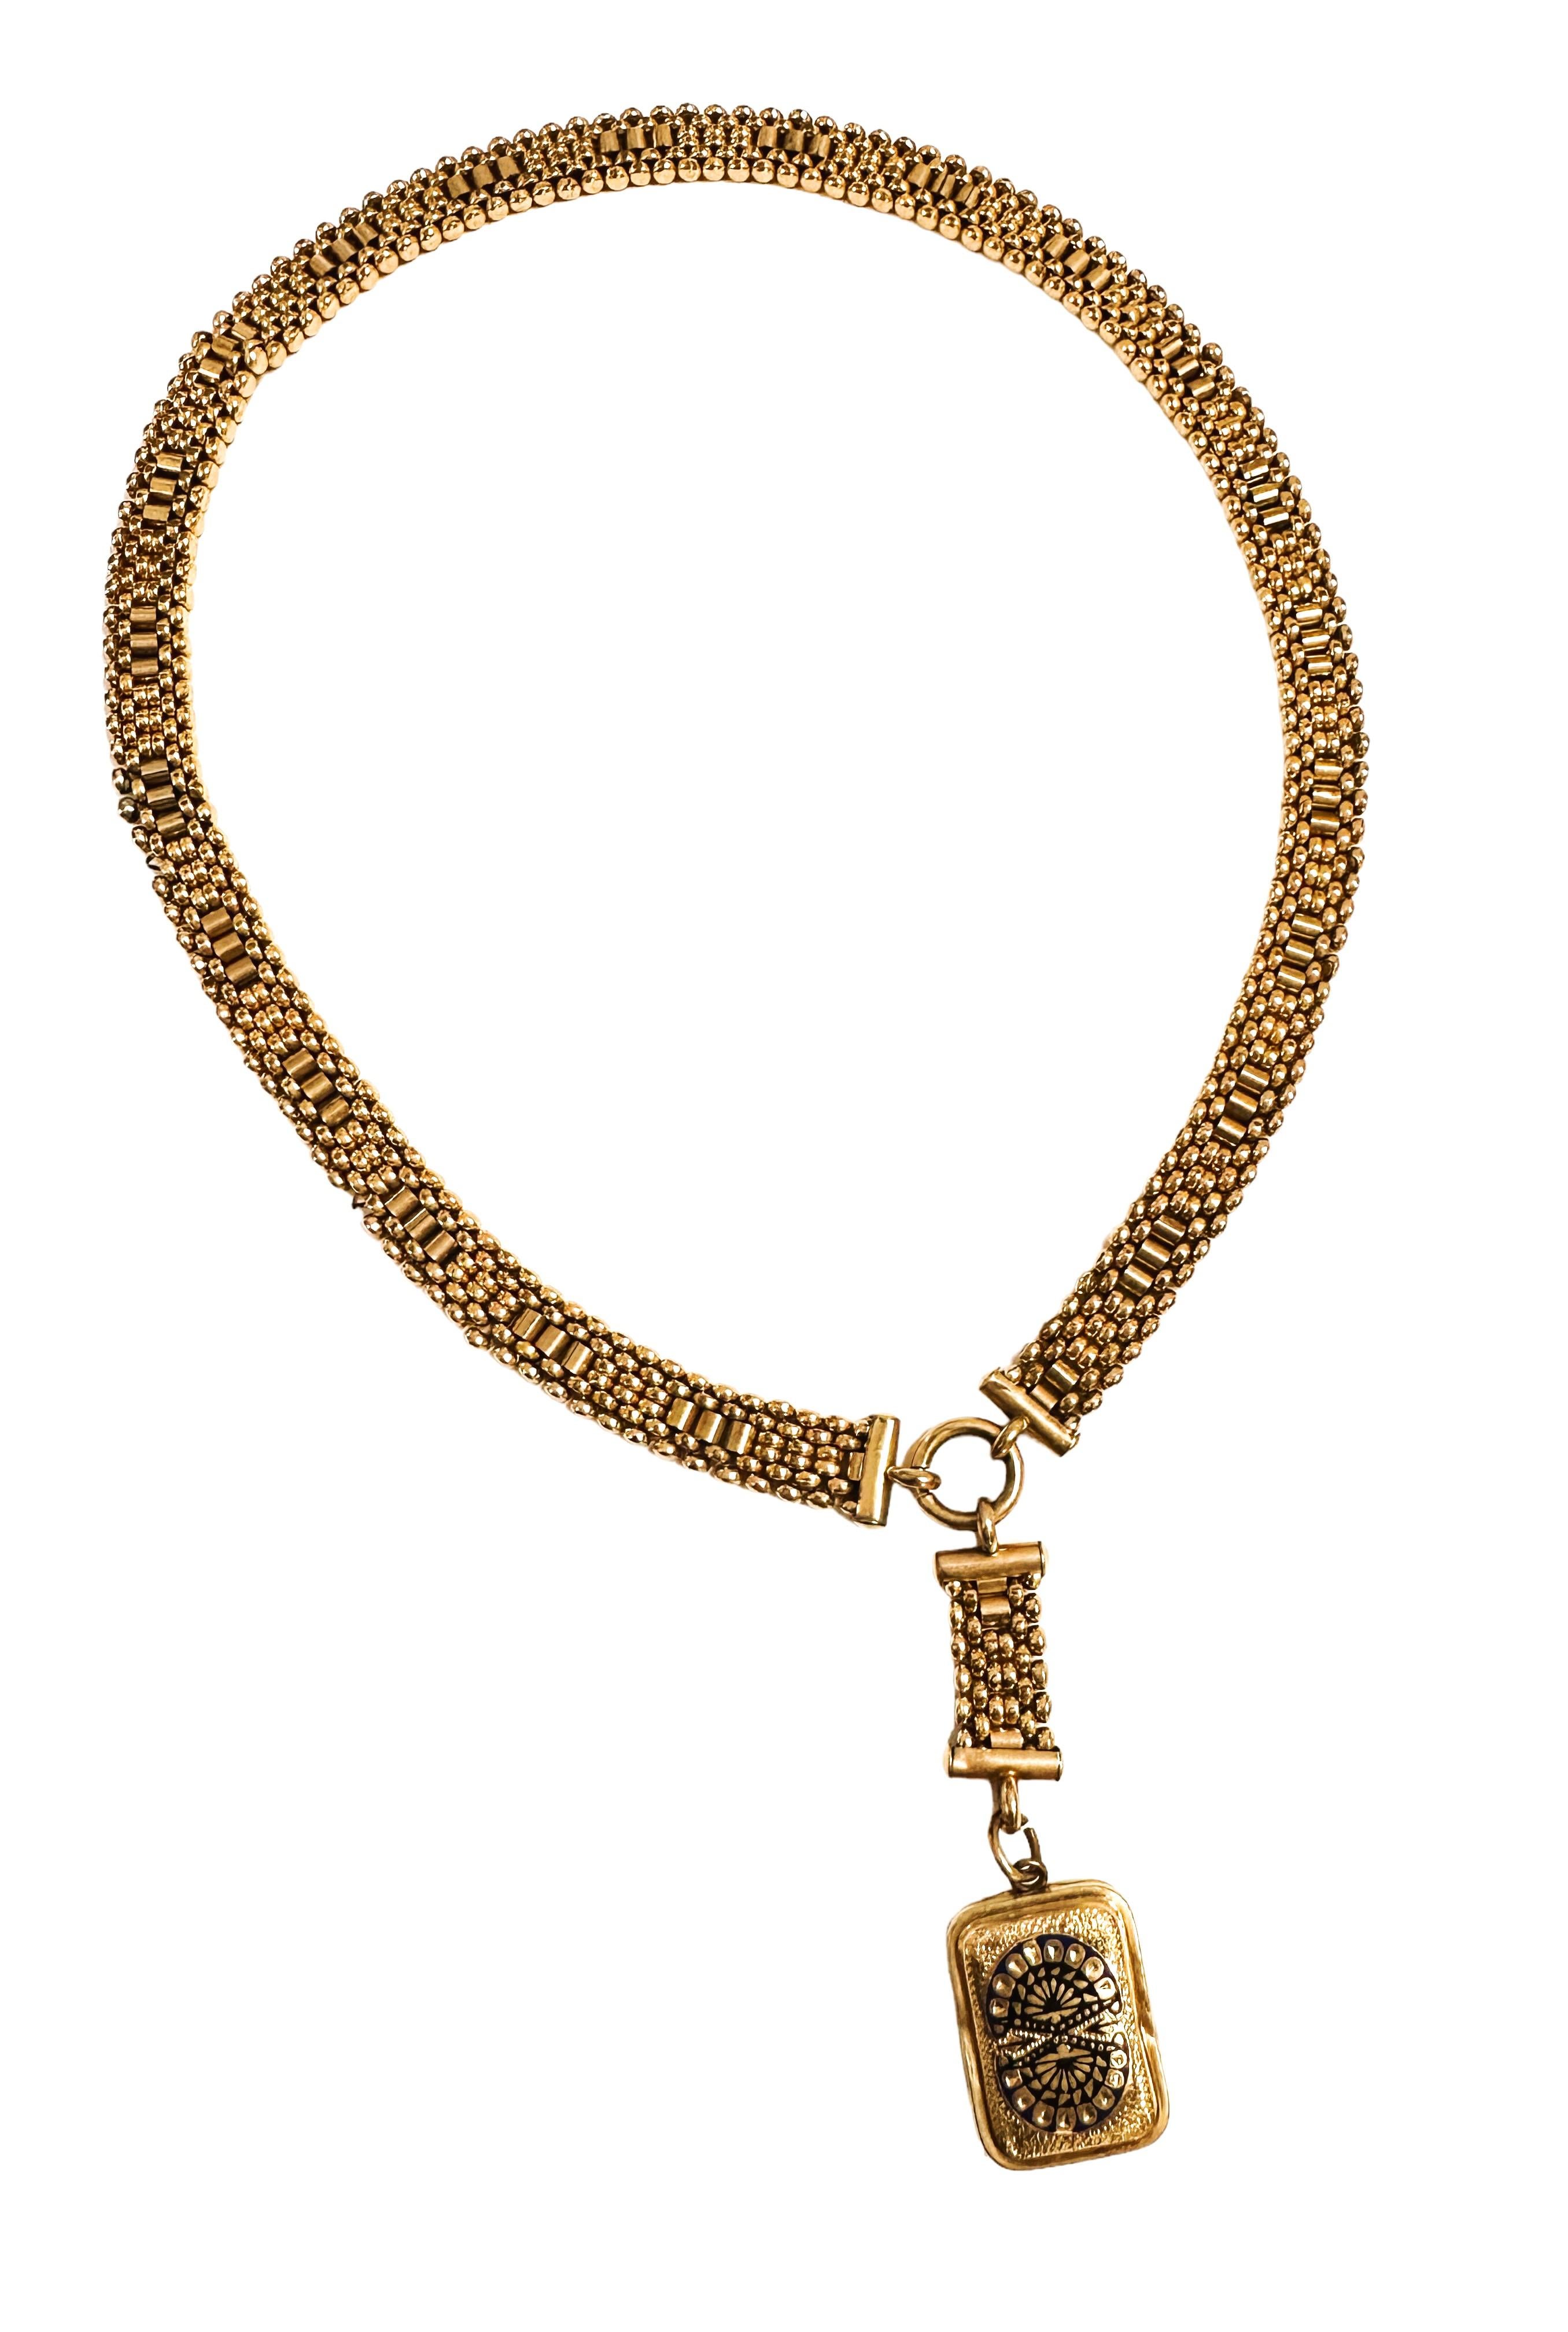 Vintage Gold-Filled Two-Sided Locket Necklace 18 Inches 3